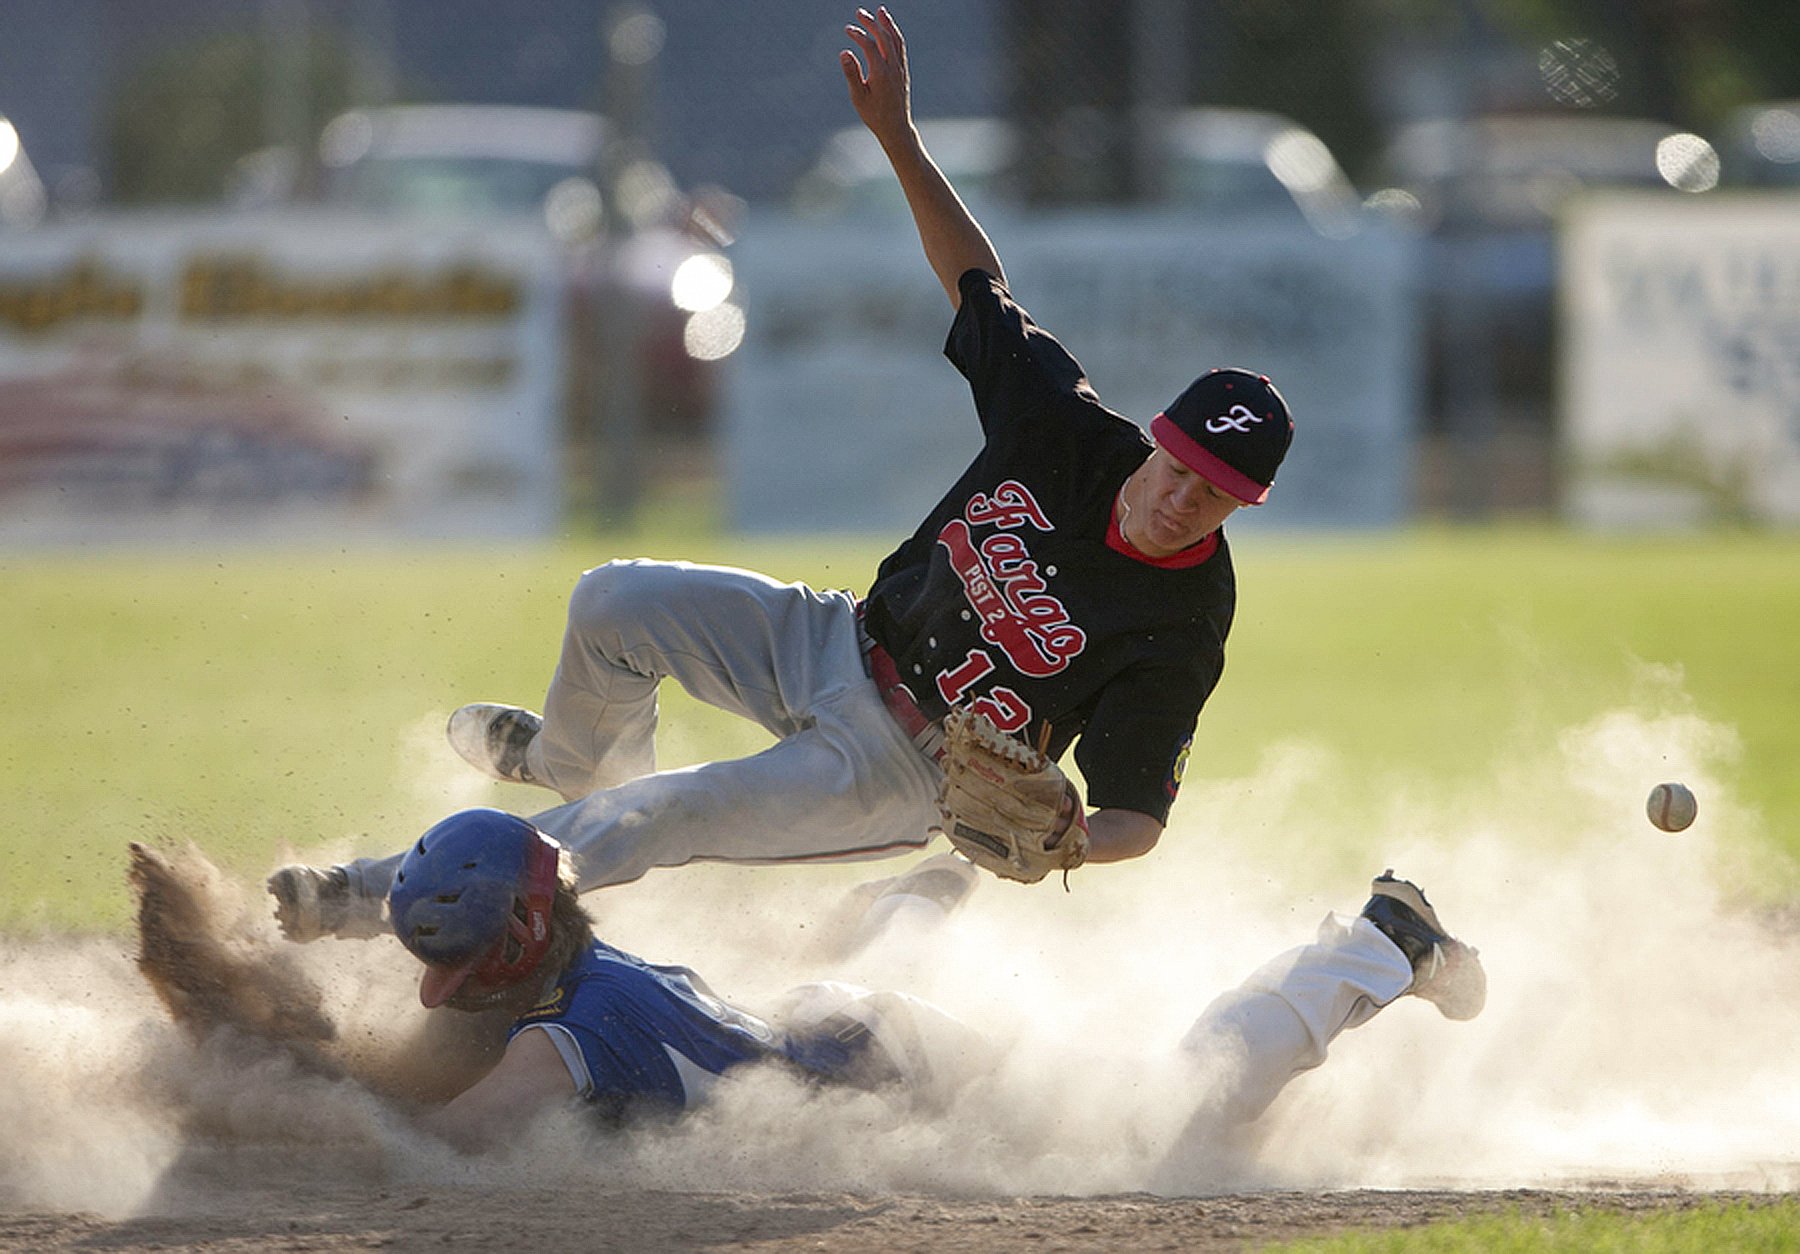  Fargo shortstop Jake Salentine dives for a catch in attempt to tag East Grand Forks' Hunter Aubol, as he slides safely into second base during the game at Stauss Field Thursday evening. East Grand Forks Legion Post 157 lost to Fargo Legion Post 2, w